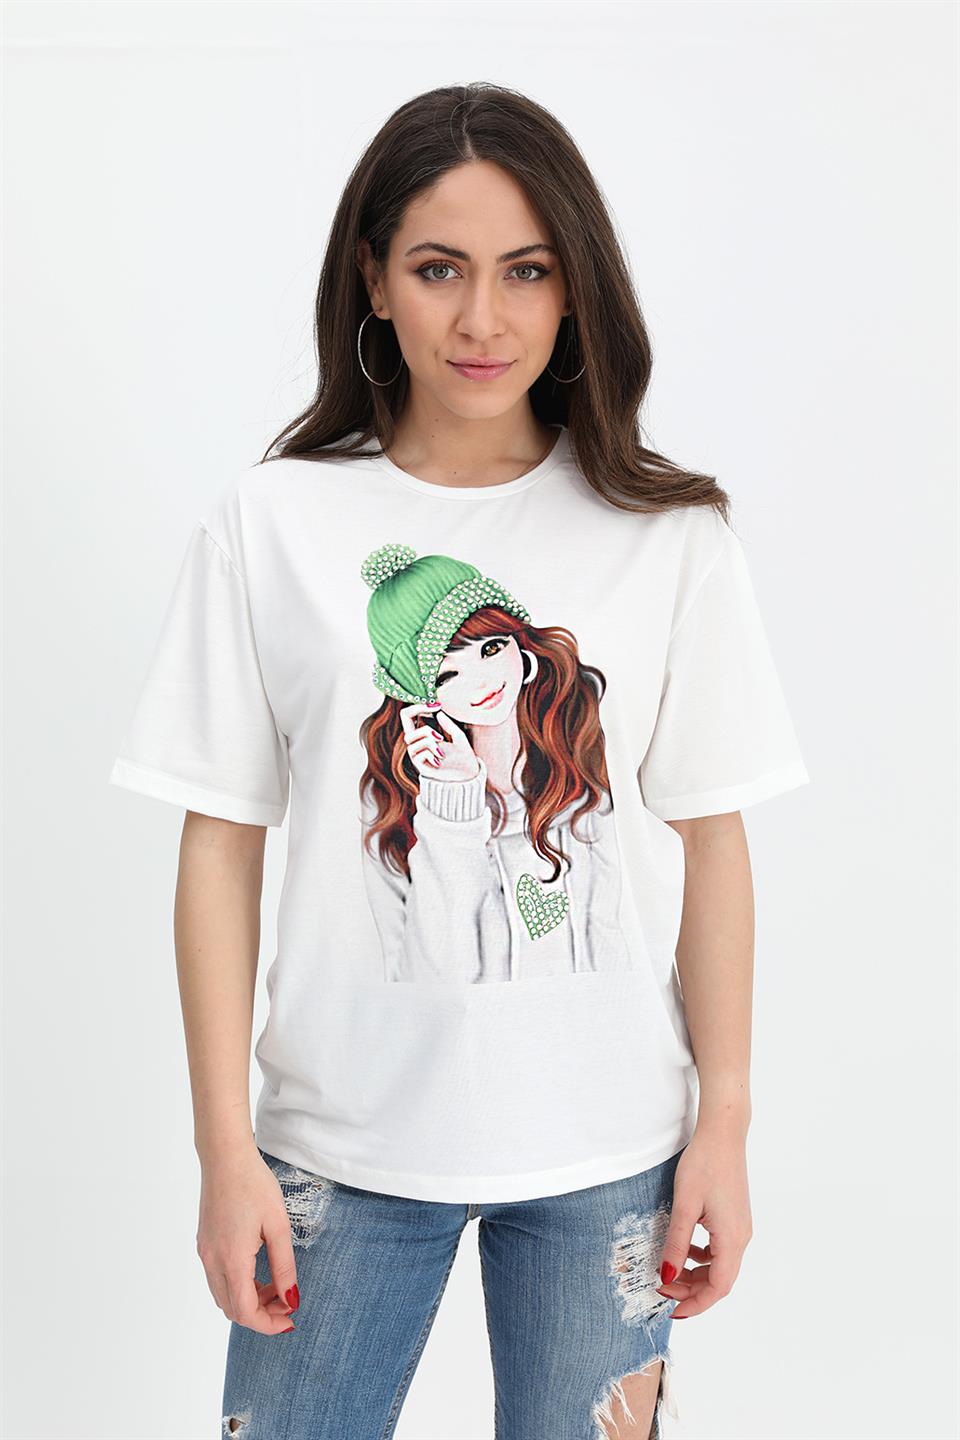 Women's T-shirt Girl Printed Stone Embroidered - Green - STREETMODE™